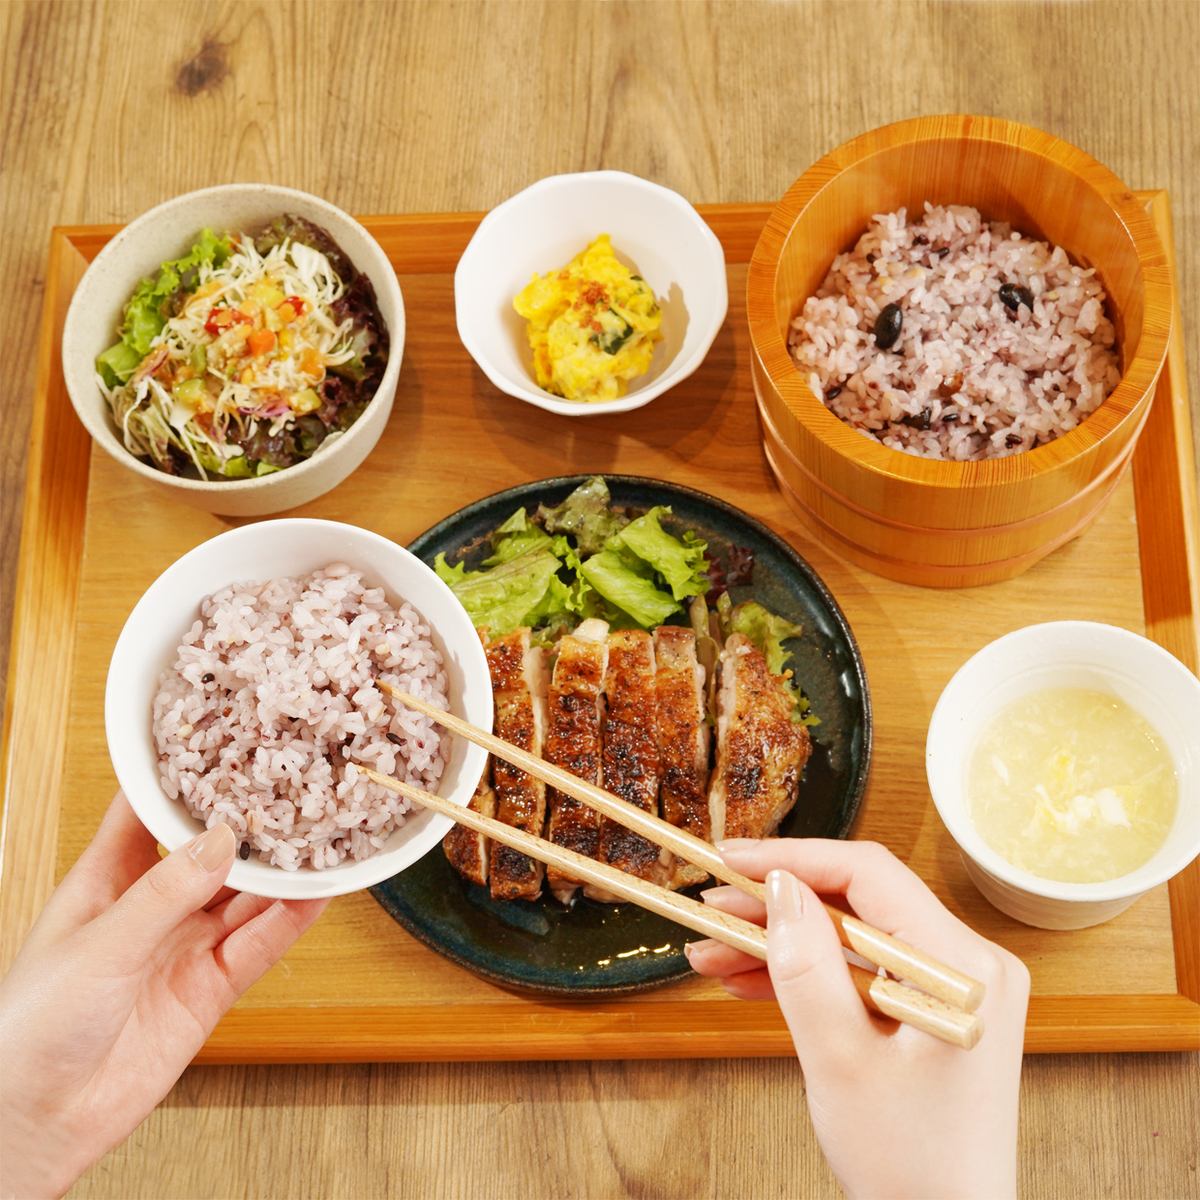 You can casually enjoy typical Asian rice in a set meal style!